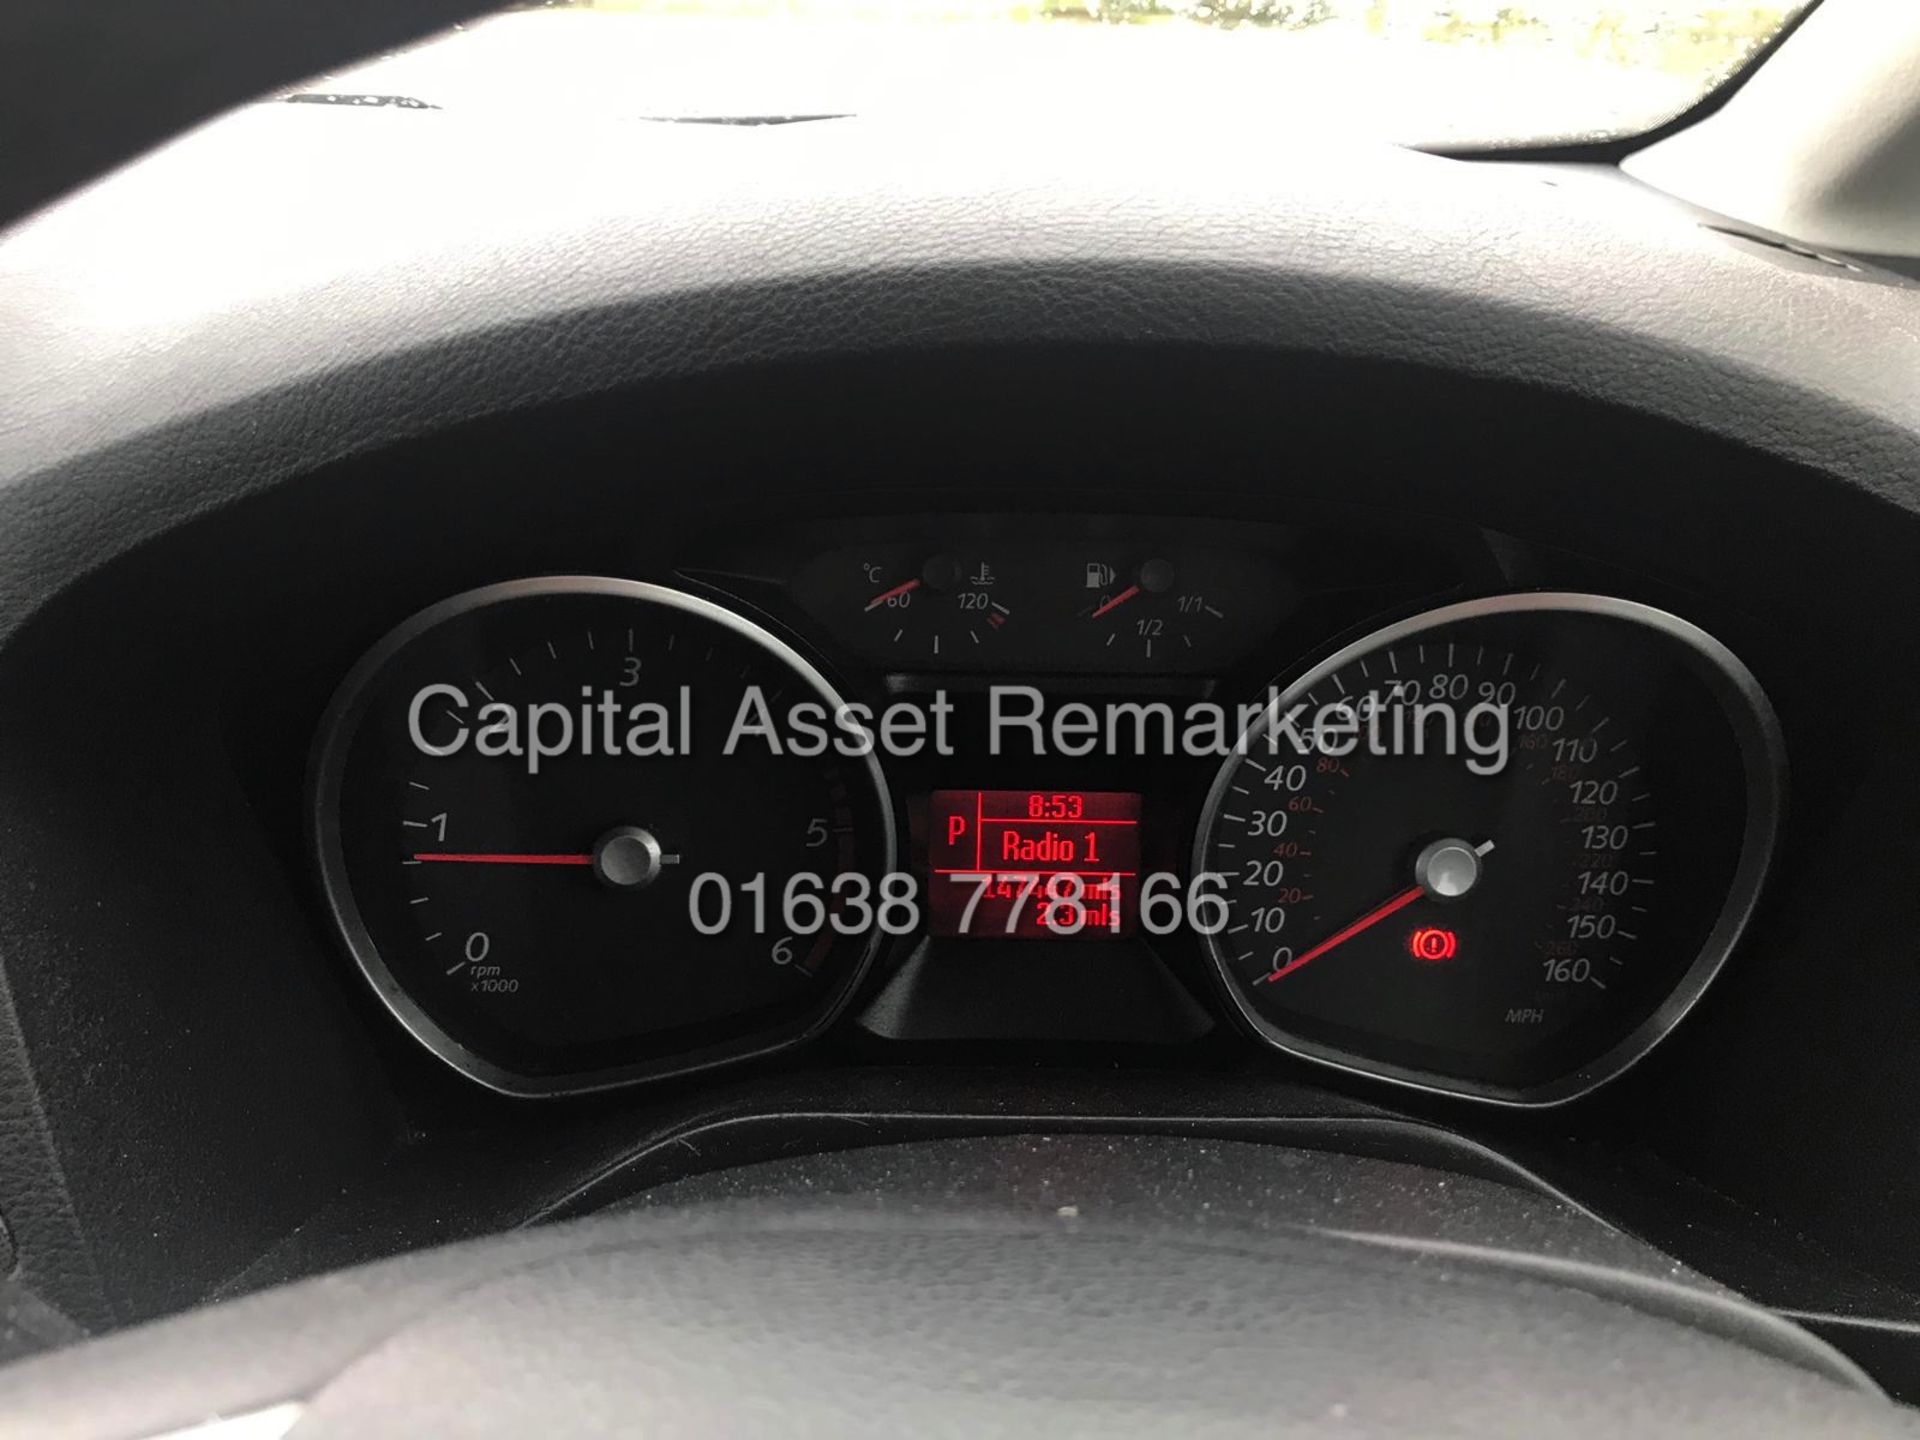 (ON SALE) FORD GALAXY 2.0TDCI "EDGE" 7 SEATER - 08 REG - AIR CON - 1 PREVIOUS OWNER - BLACK - Image 6 of 14